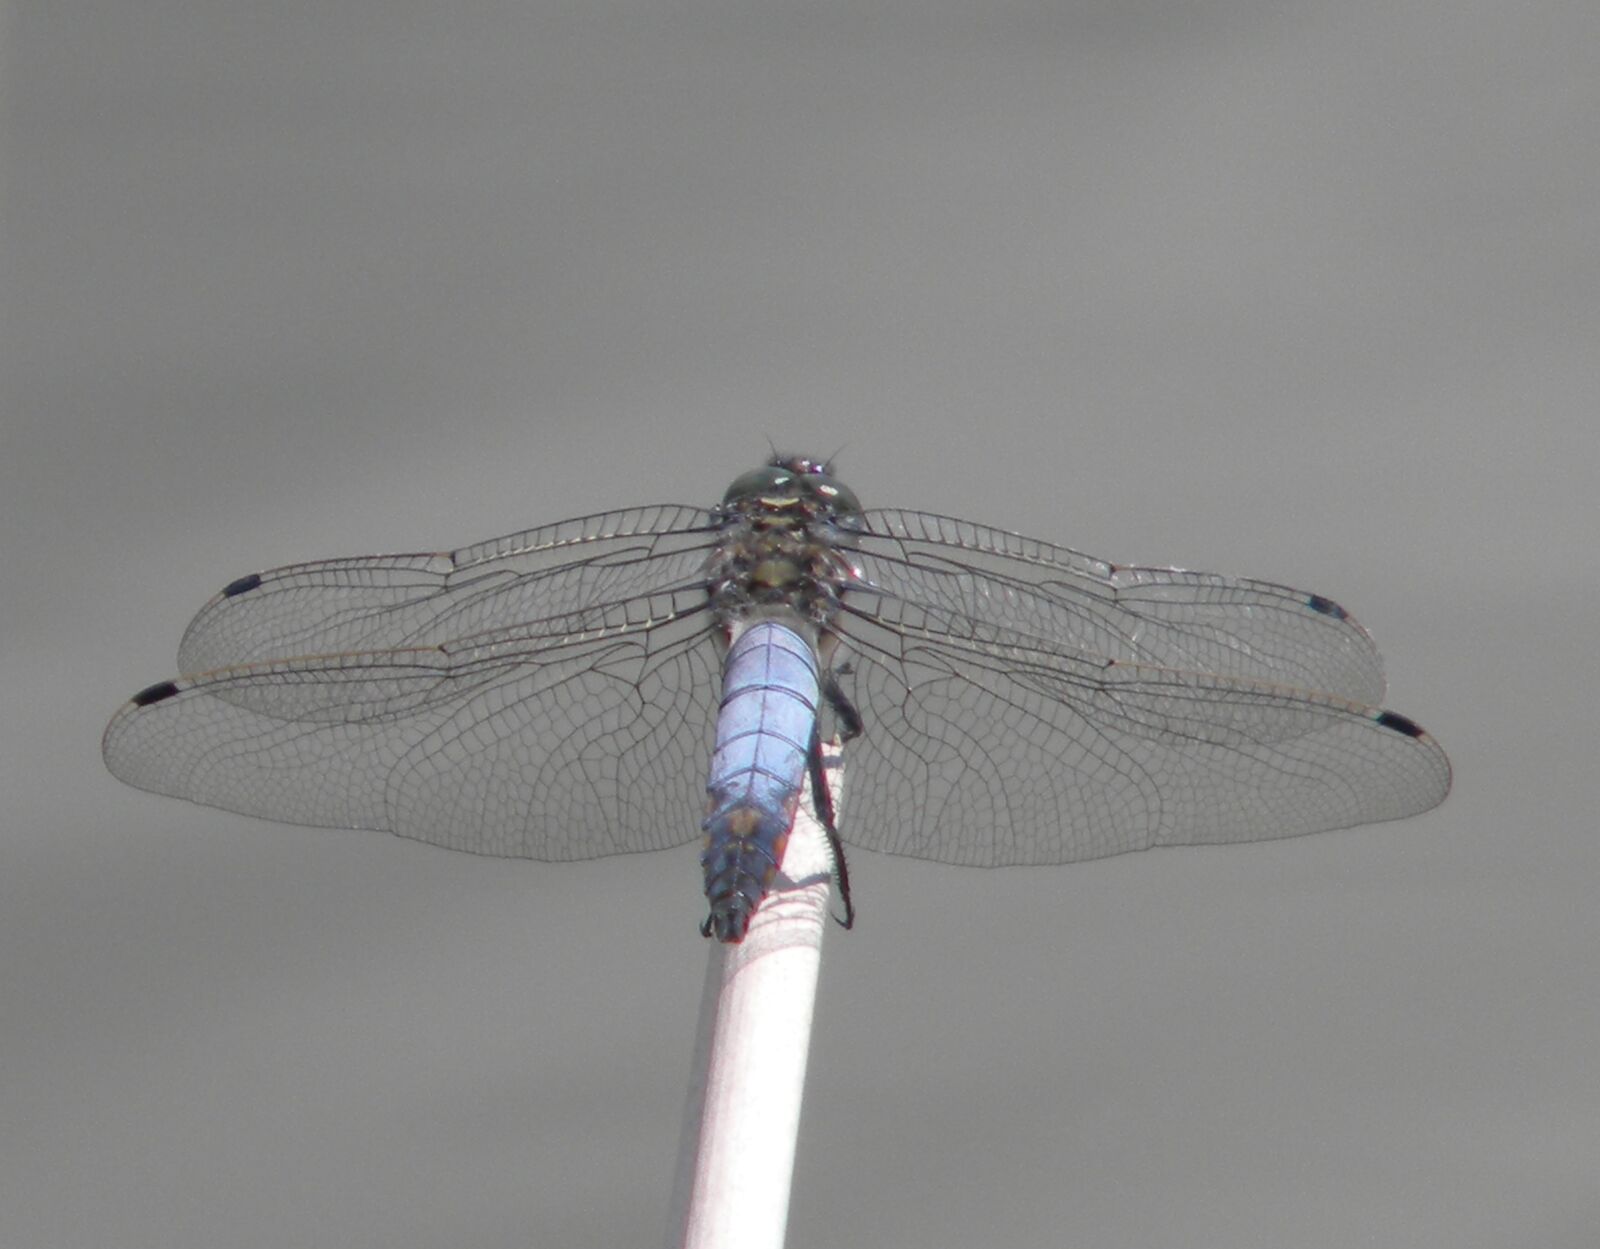 Nikon Coolpix L100 sample photo. Animal, dragonfly, insect photography